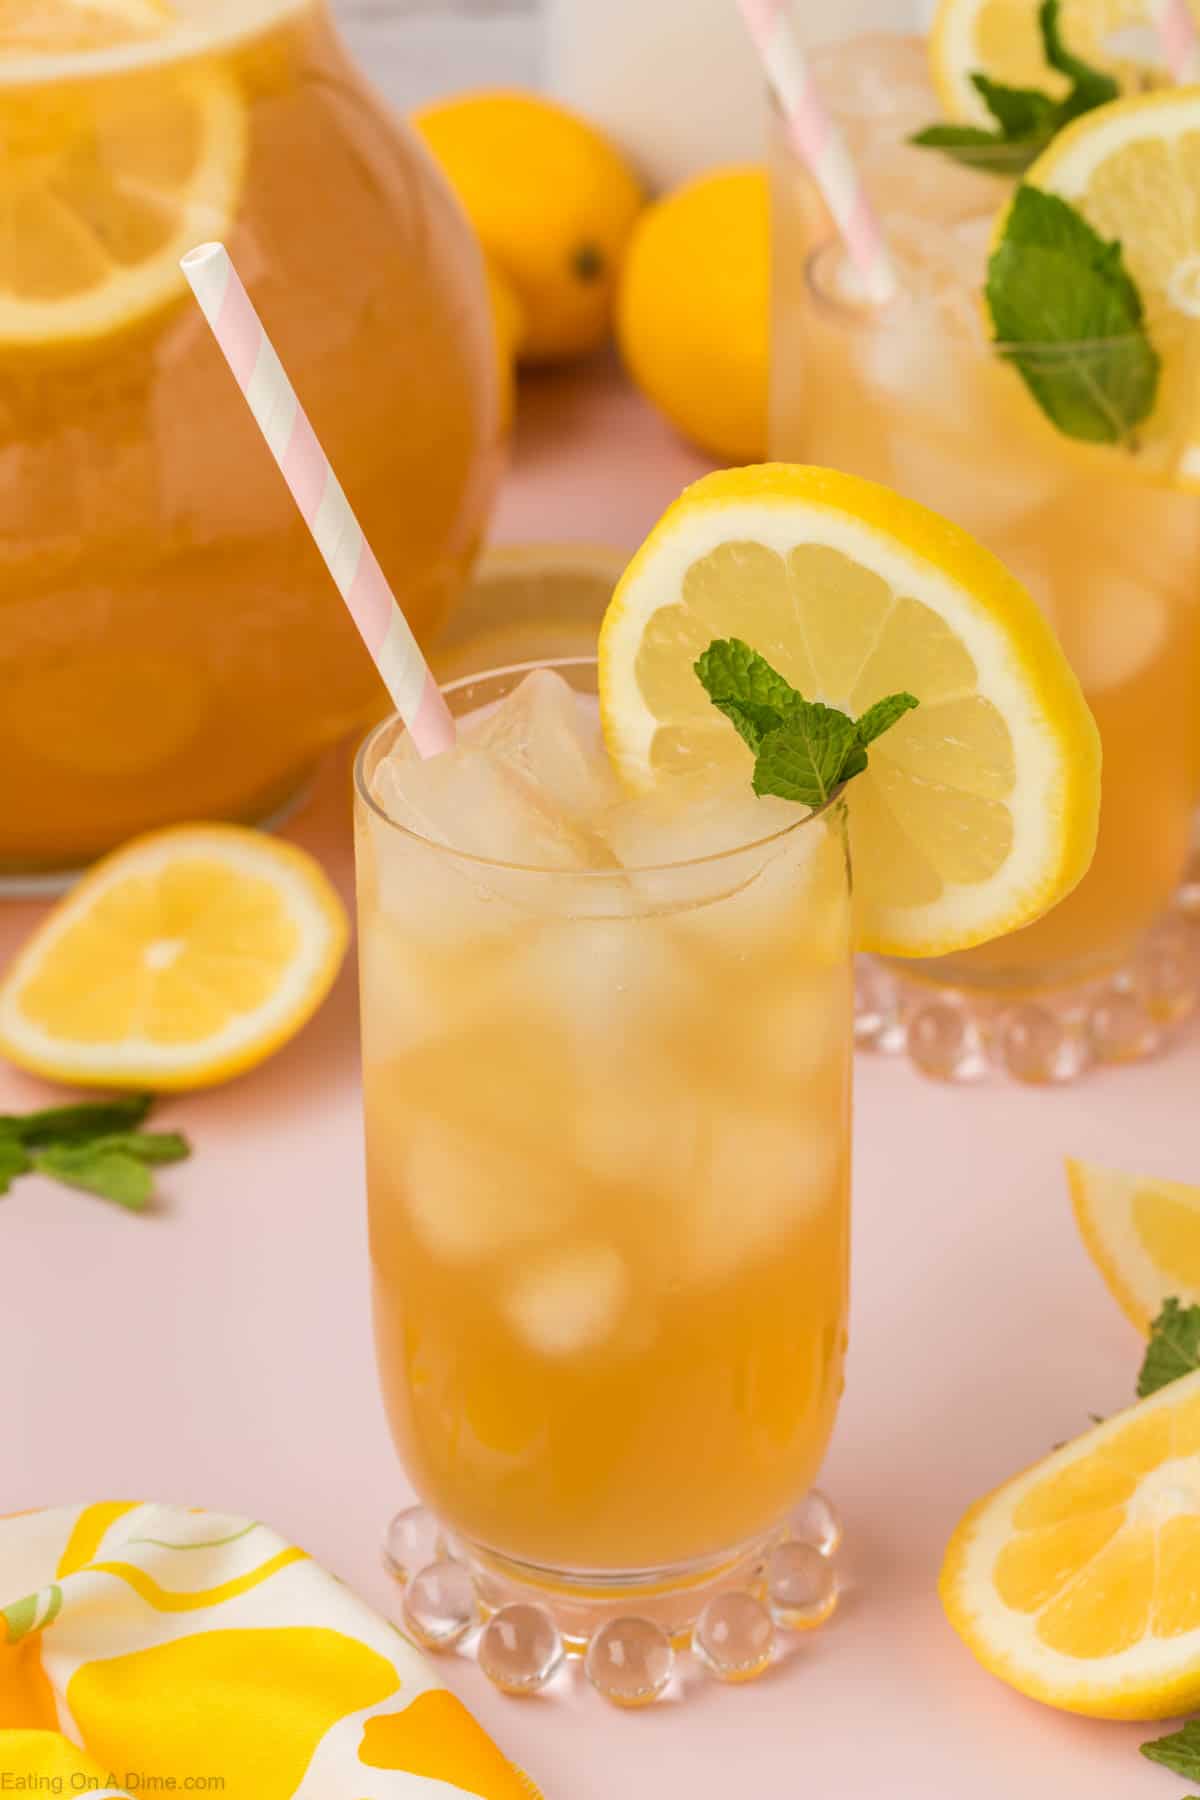 Glass of sparkling lemonade in a glass garnished with a lemon slice and fresh mint. Pitcher of lemonade in the background